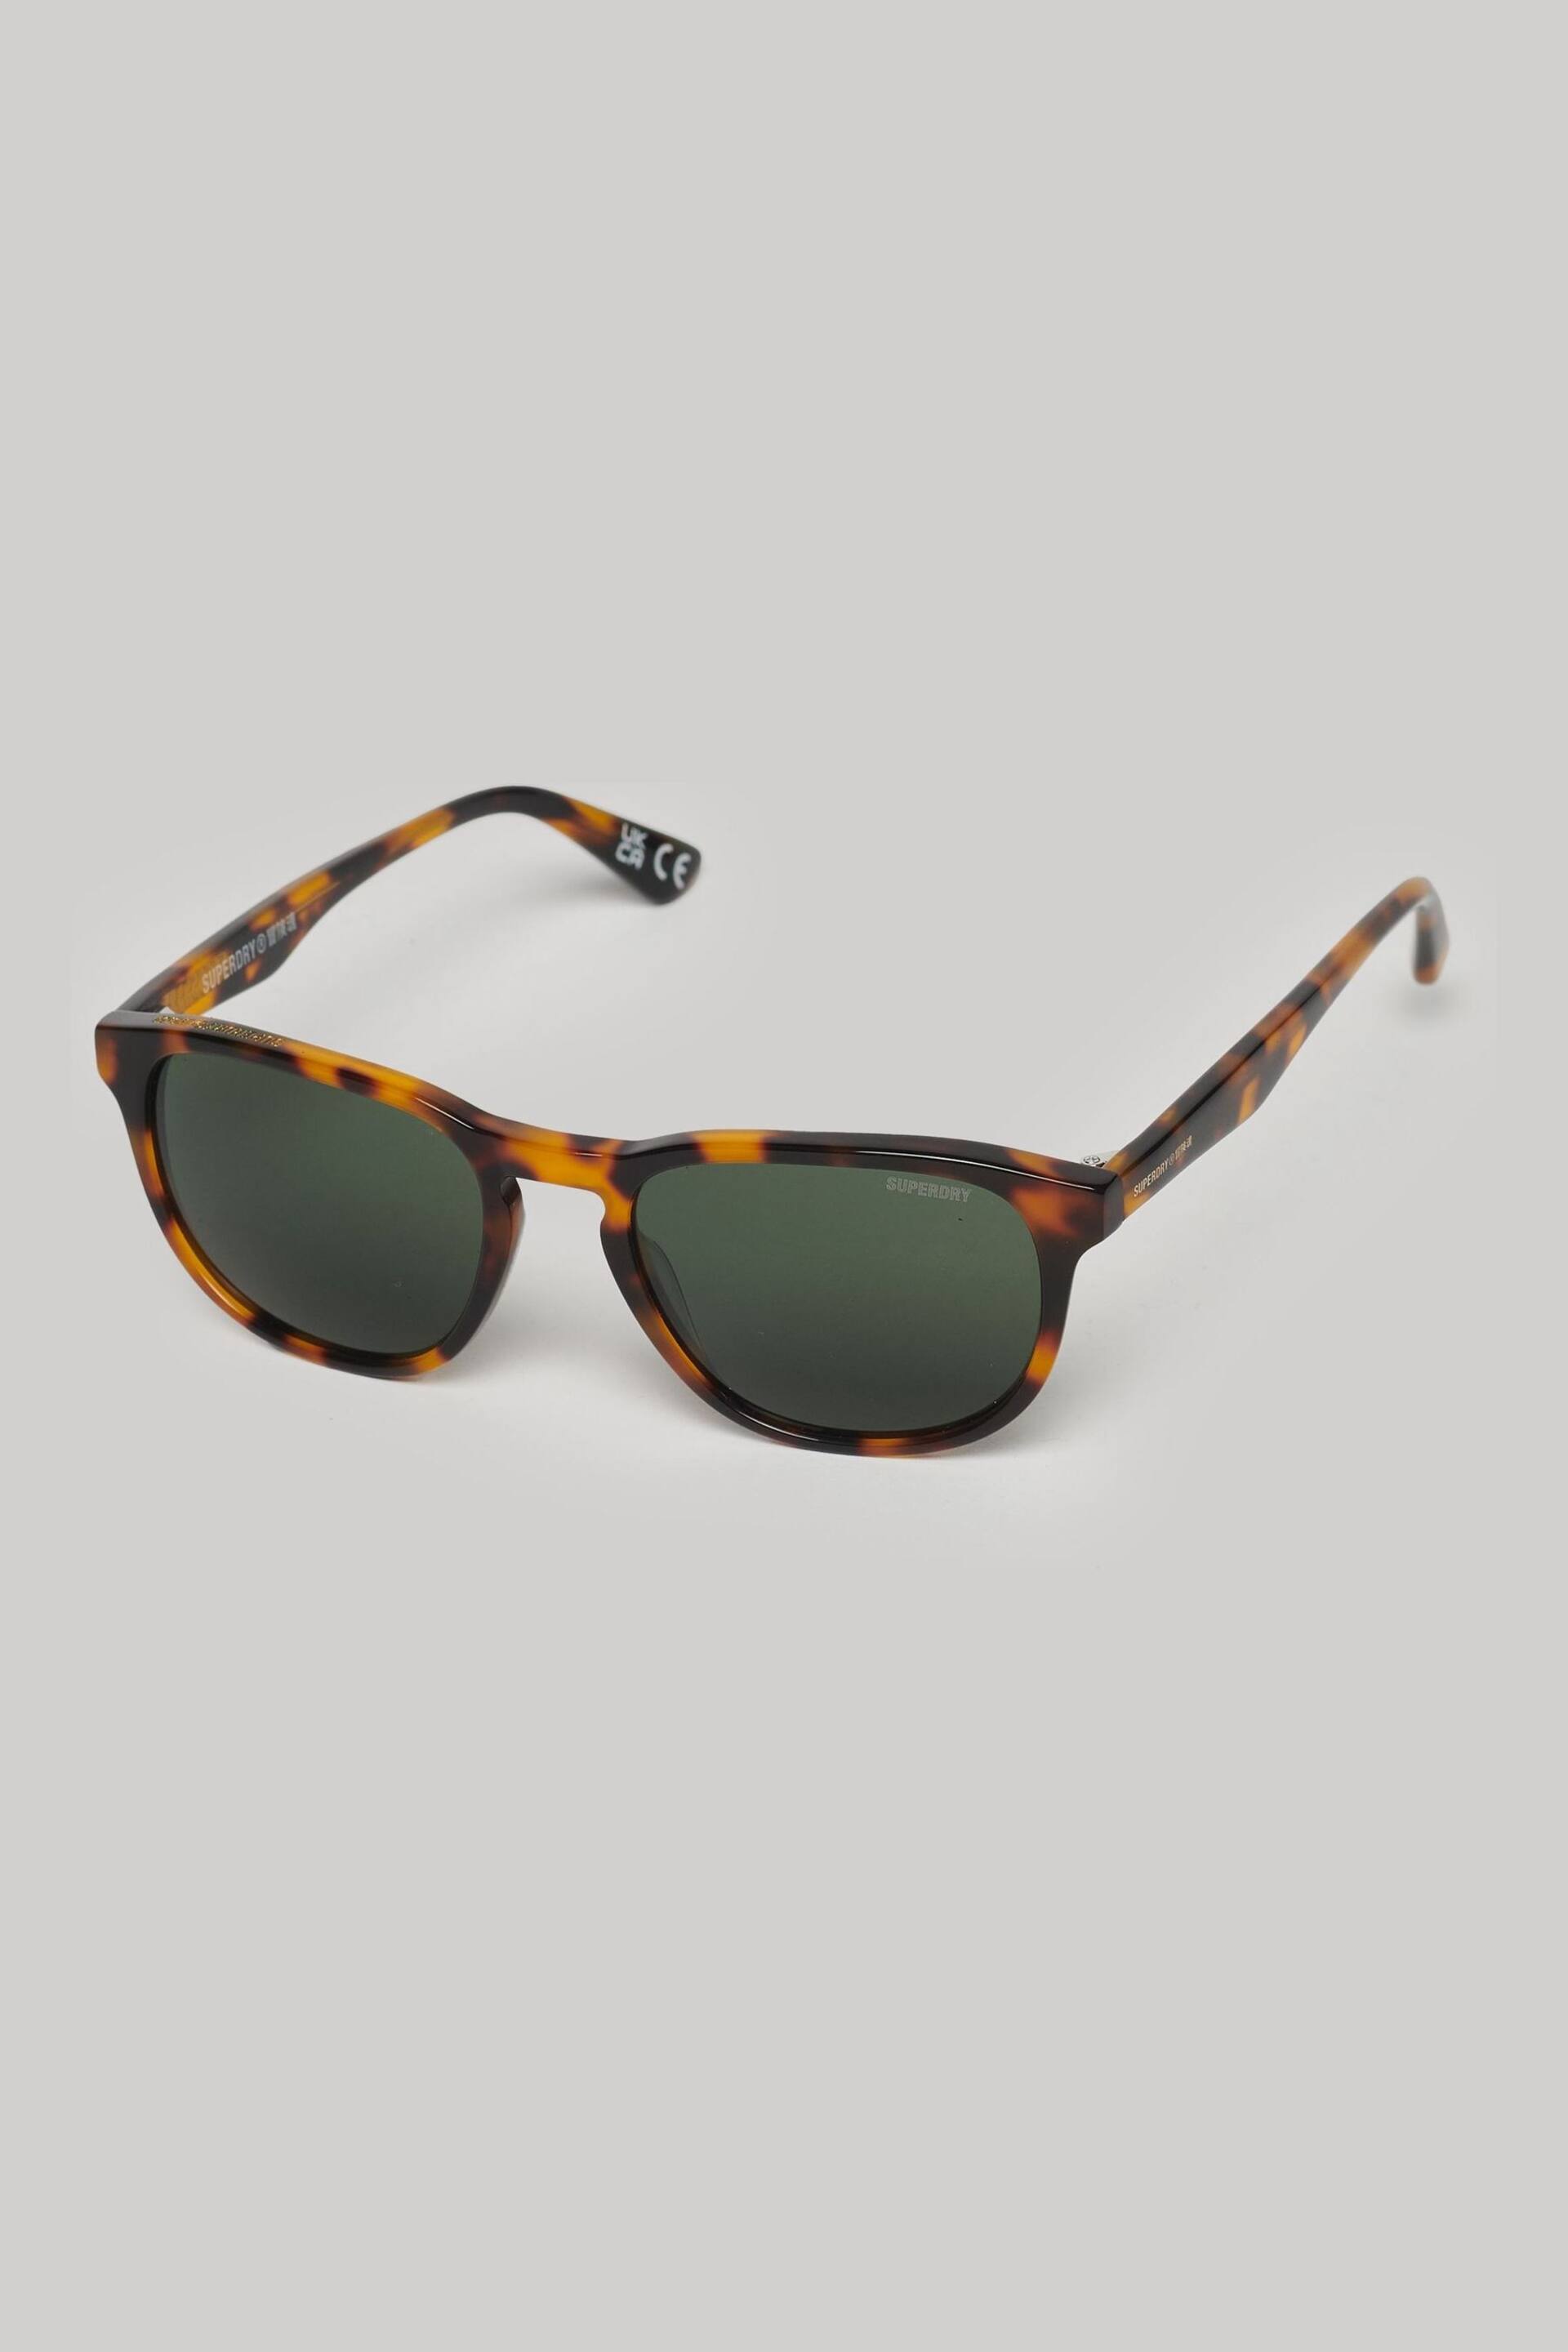 Superdry Brown SDR Camberwell Sunglasses - Image 2 of 6